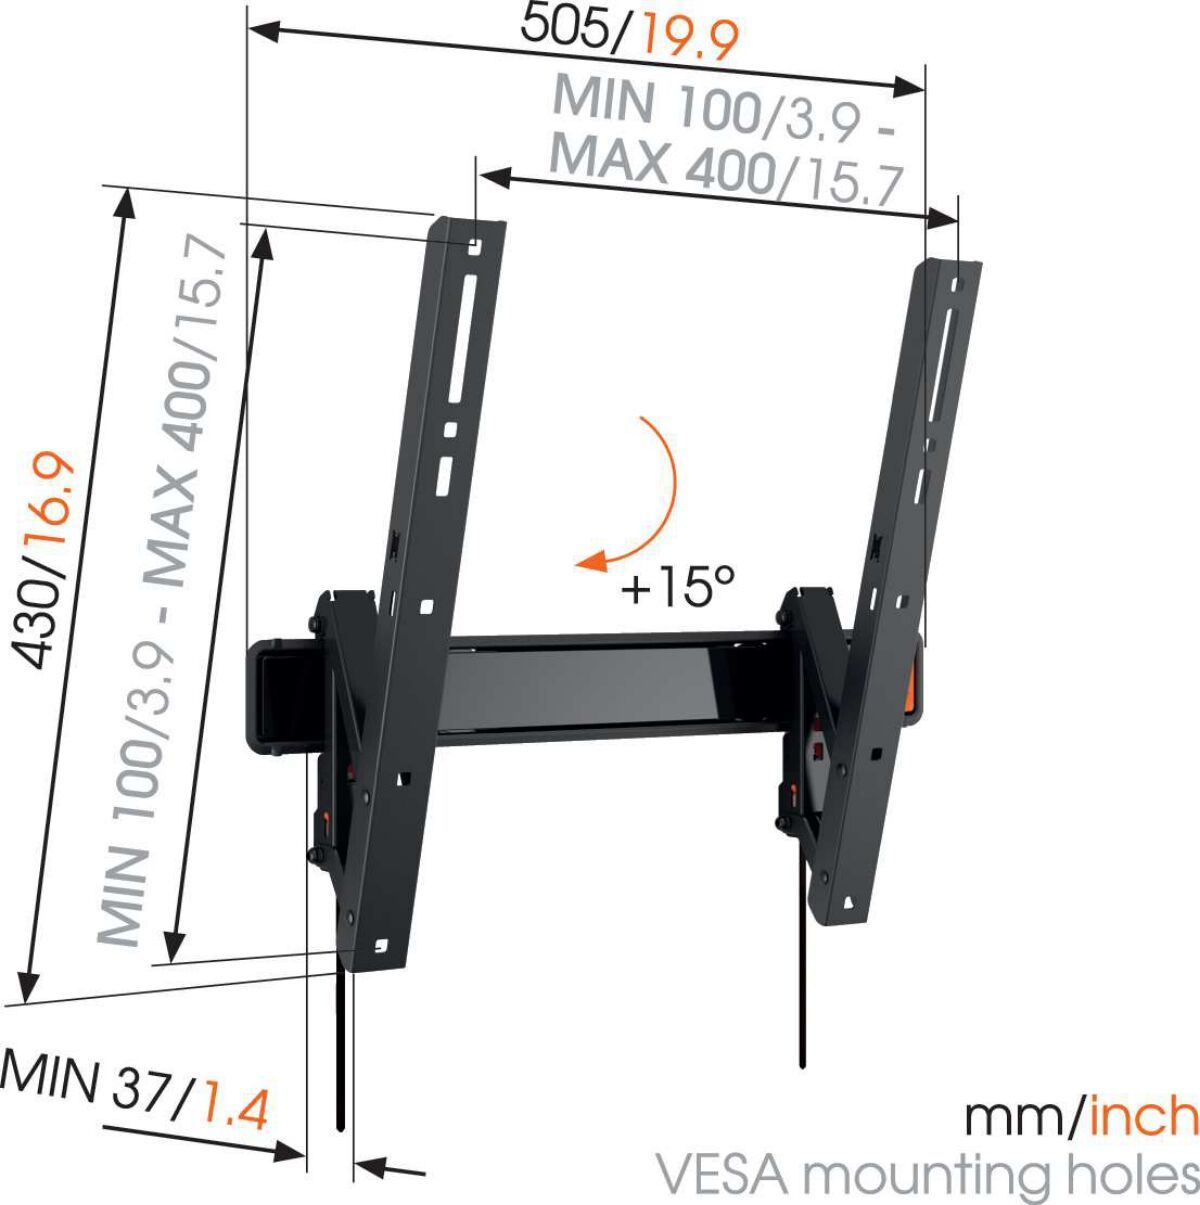 Vogel's W50710 Tilting TV Wall Mount - Suitable for 32 up to 55 inch TVs up to Dimensions